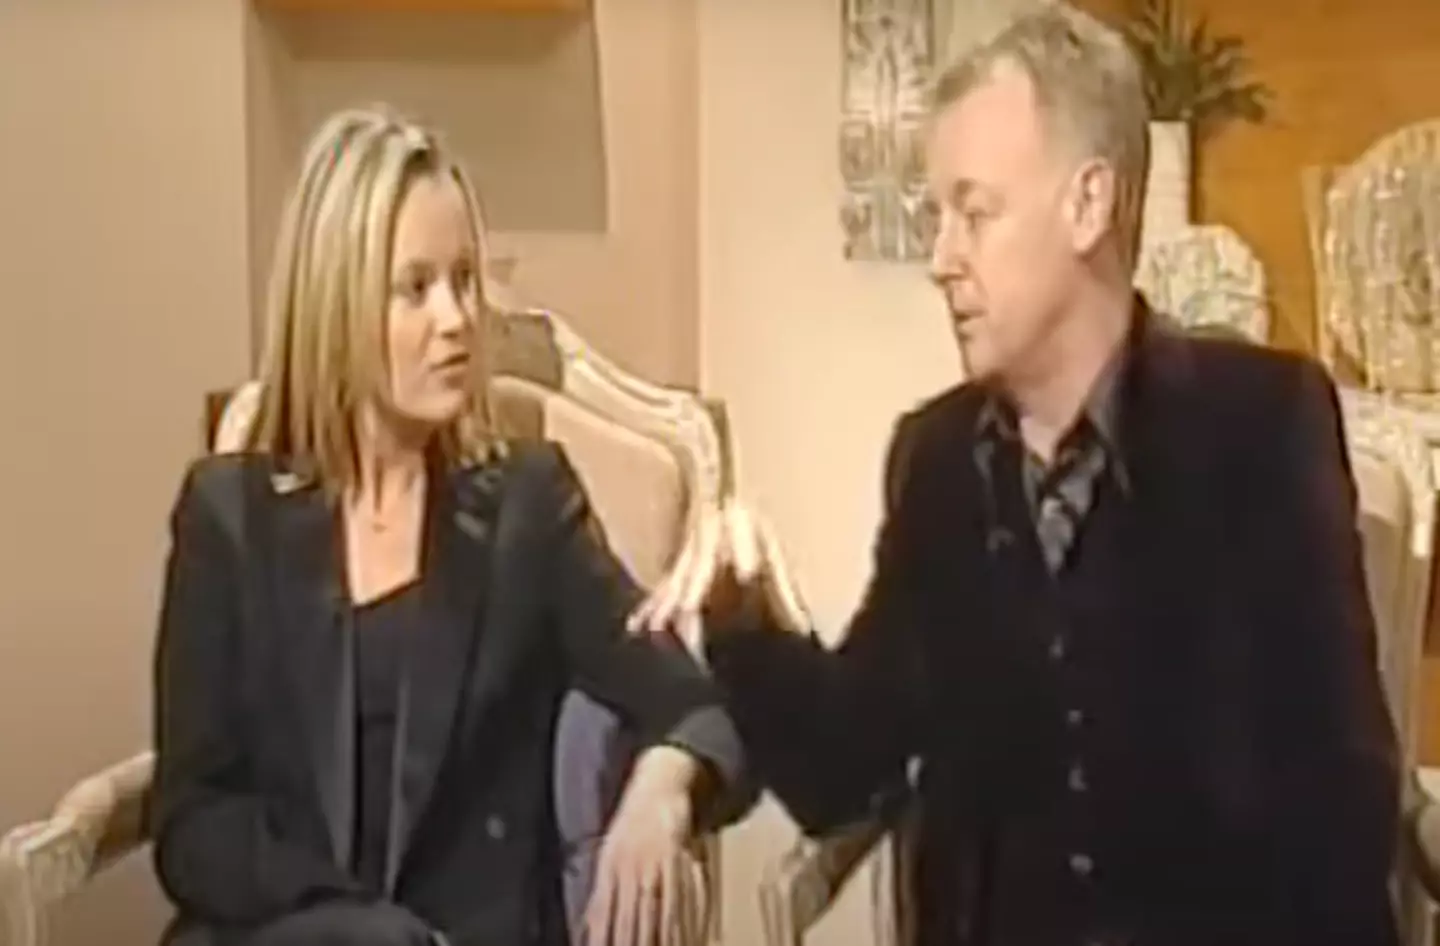 The pair on a united front in a 2001 interview.